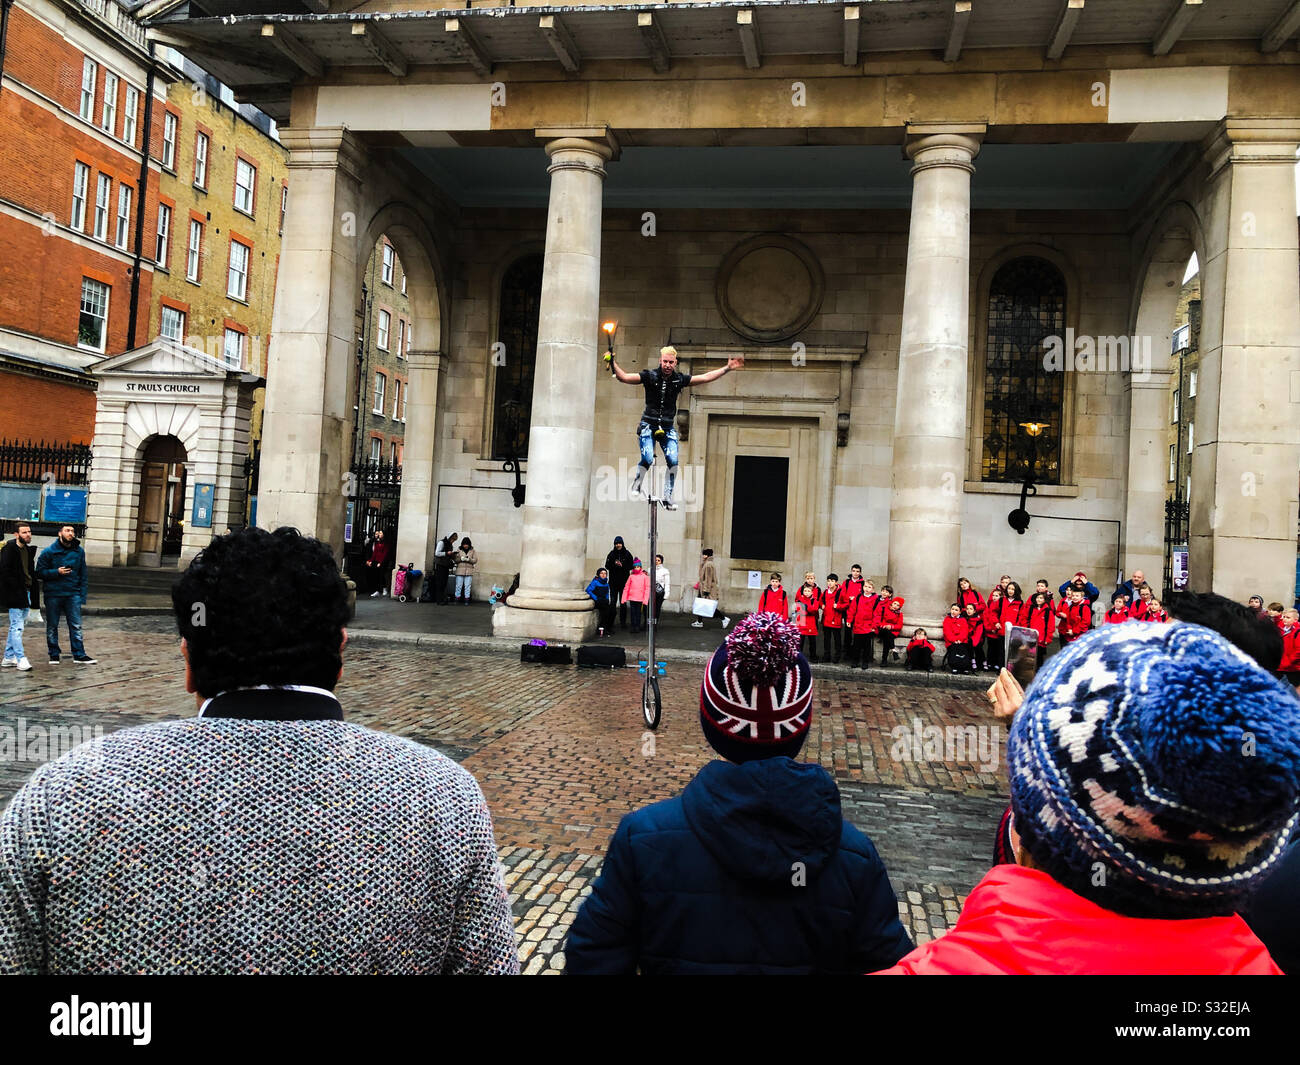 Tourists watching a street performer on a Unicycle outside St Paul’s Church, Covent Garden, London, England Stock Photo